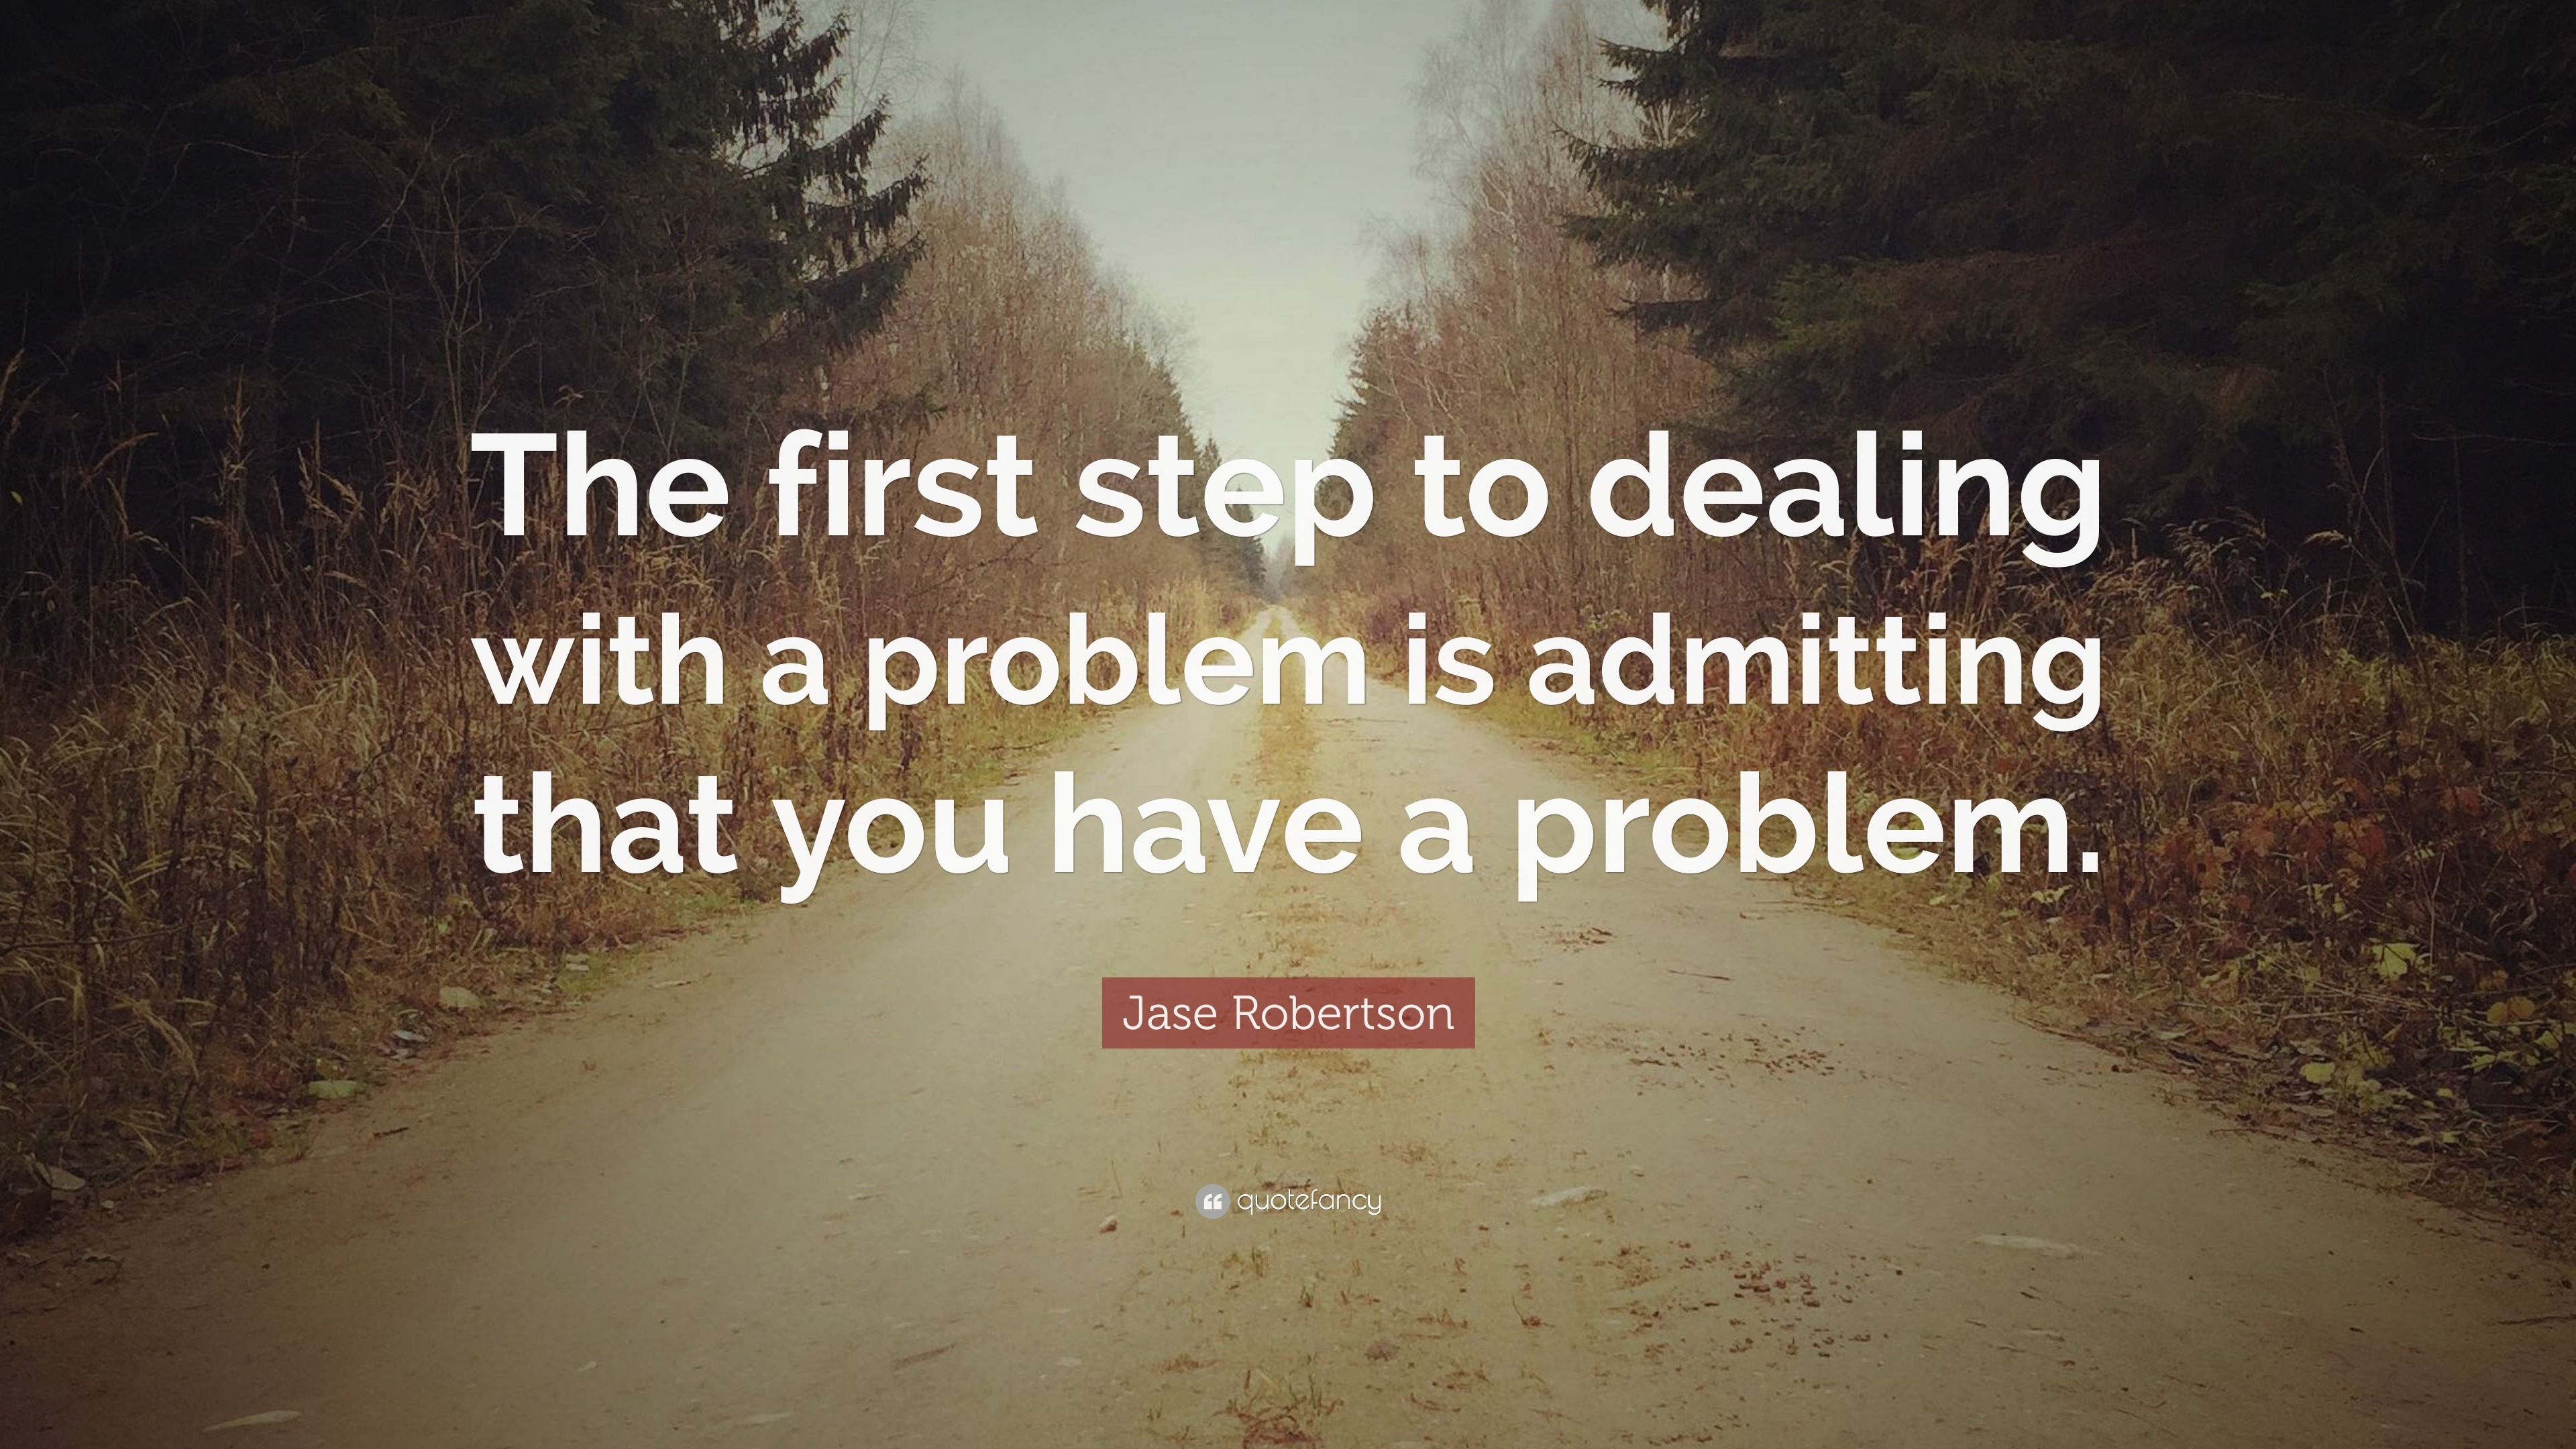 Jase Robertson Quote: “The first step to dealing with a problem is